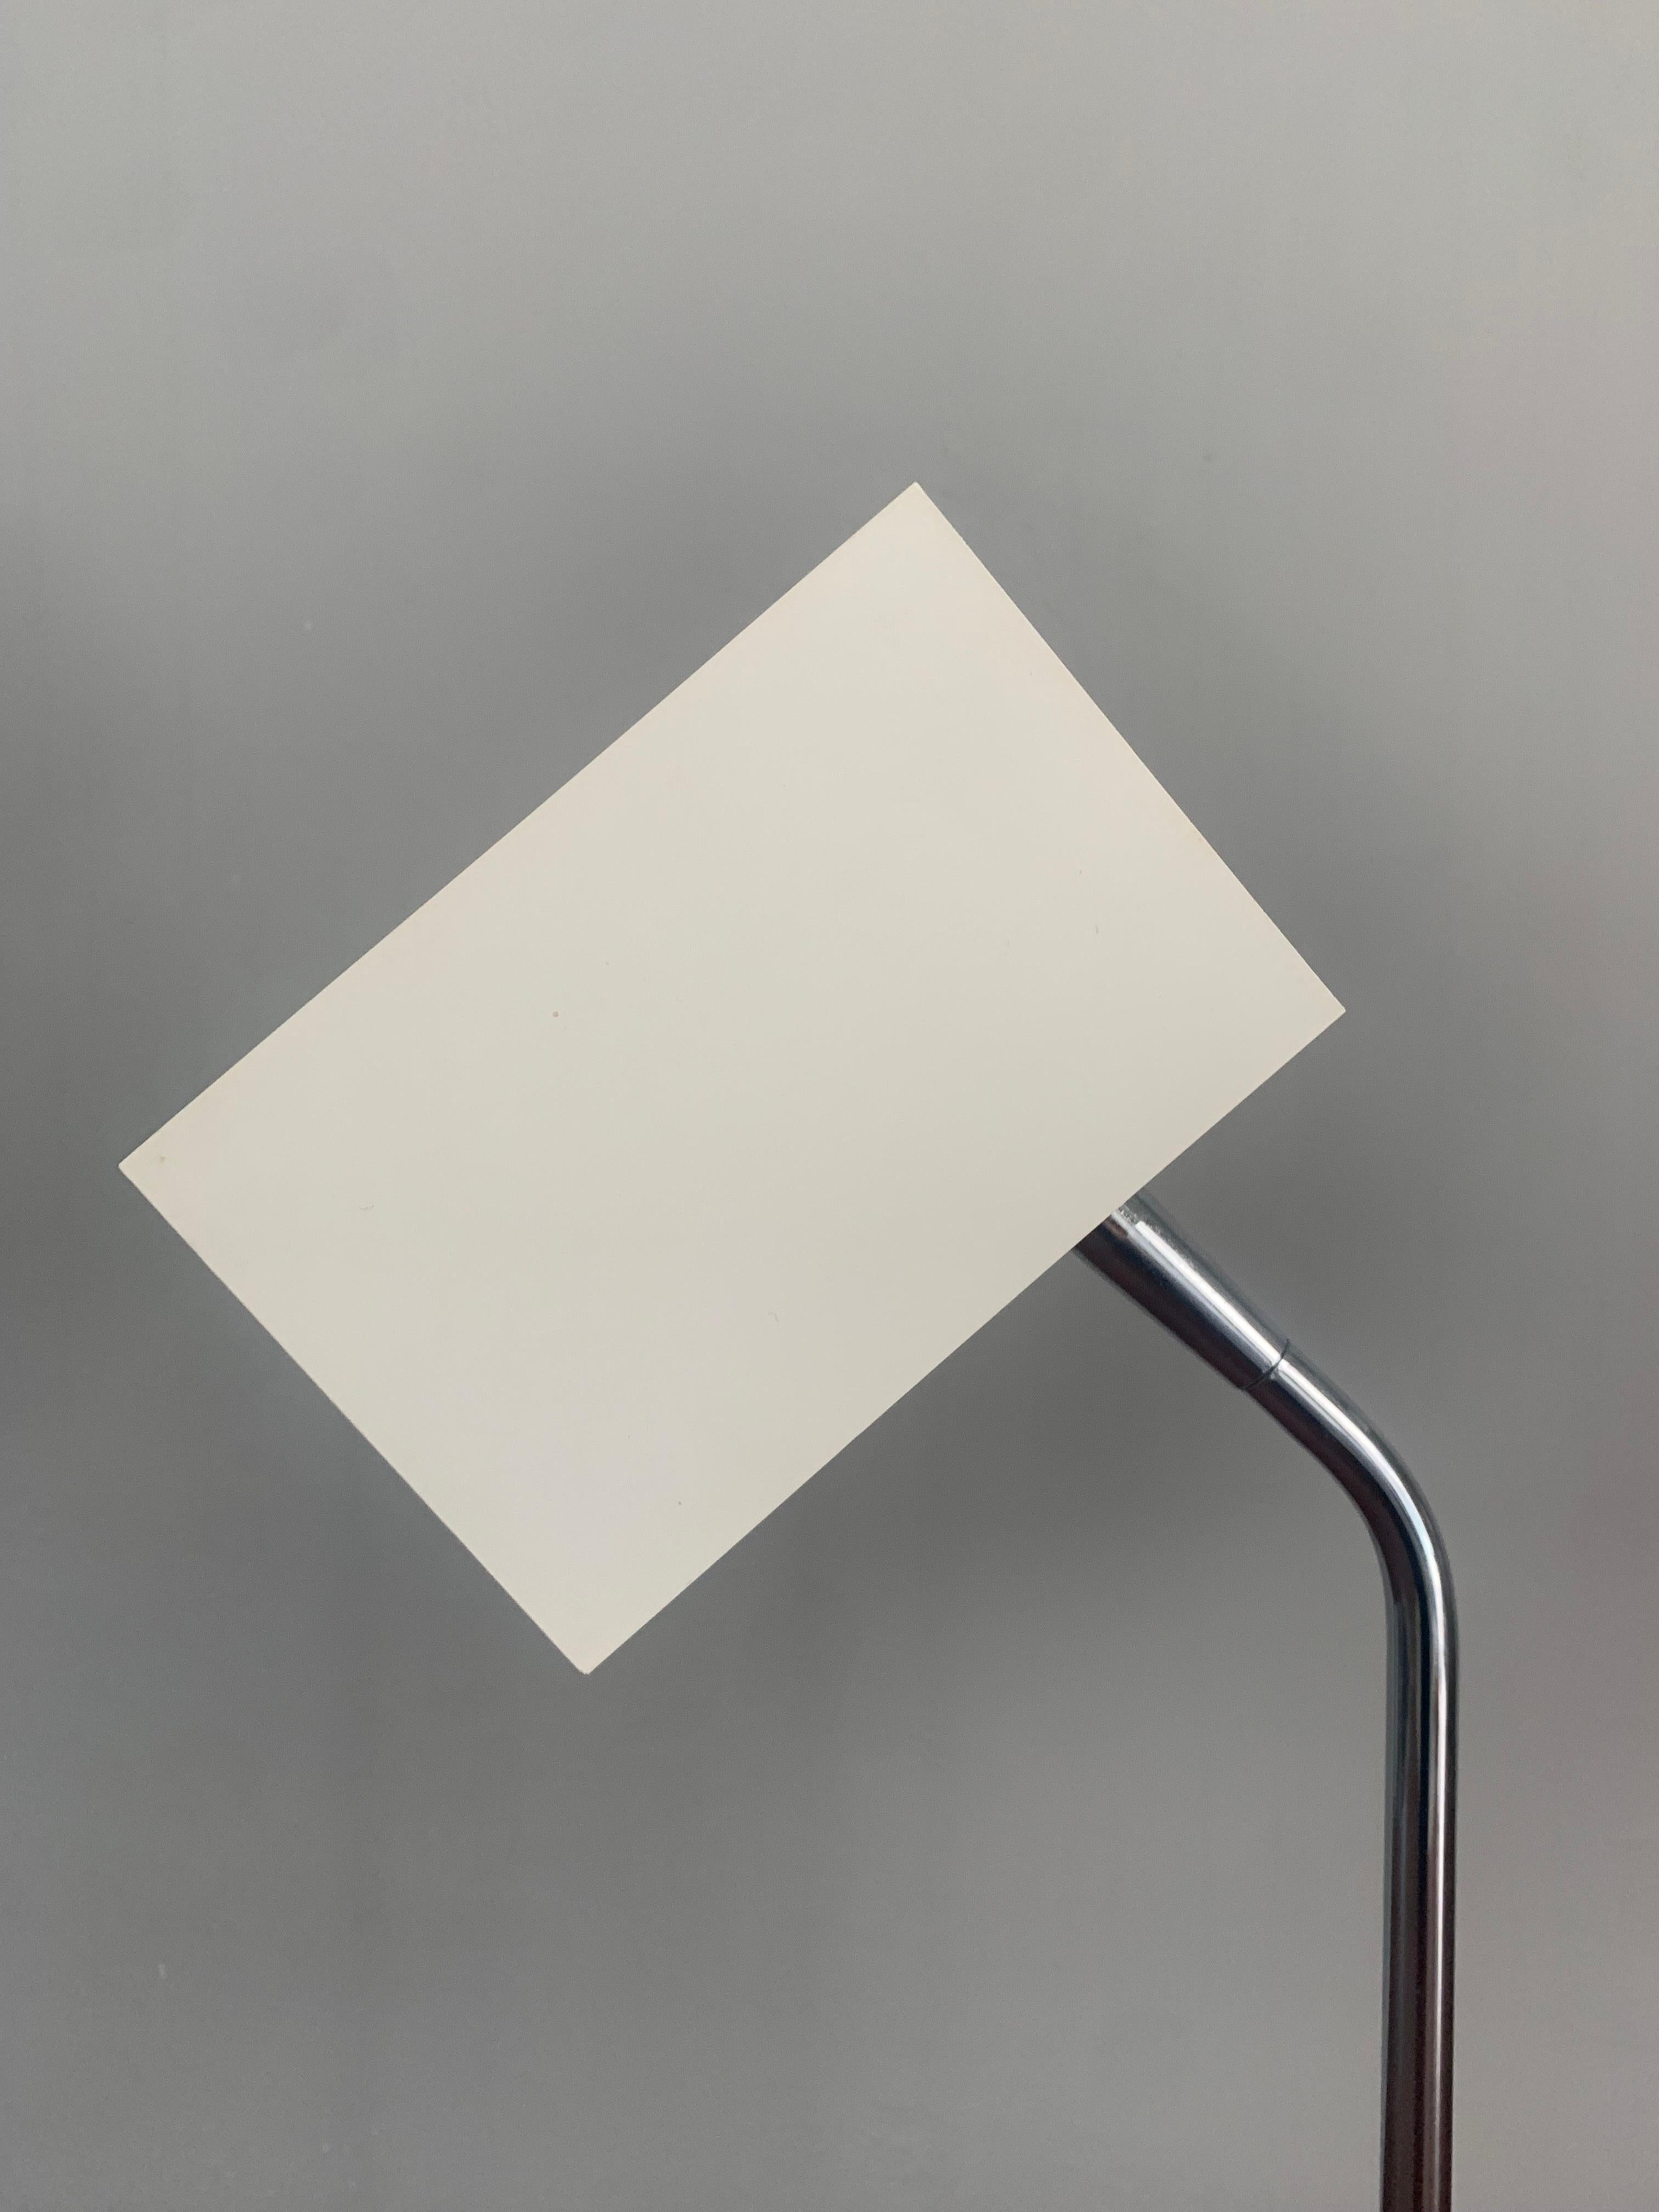 Robert Sonneman for George Kovacs double headed cube lamp. For desk or table. Iconic enameled cube shades that are adjustable in many angles to present light where desired. Affixed on angled chrome arms affixed to a heavy white base. 

Lamp is in